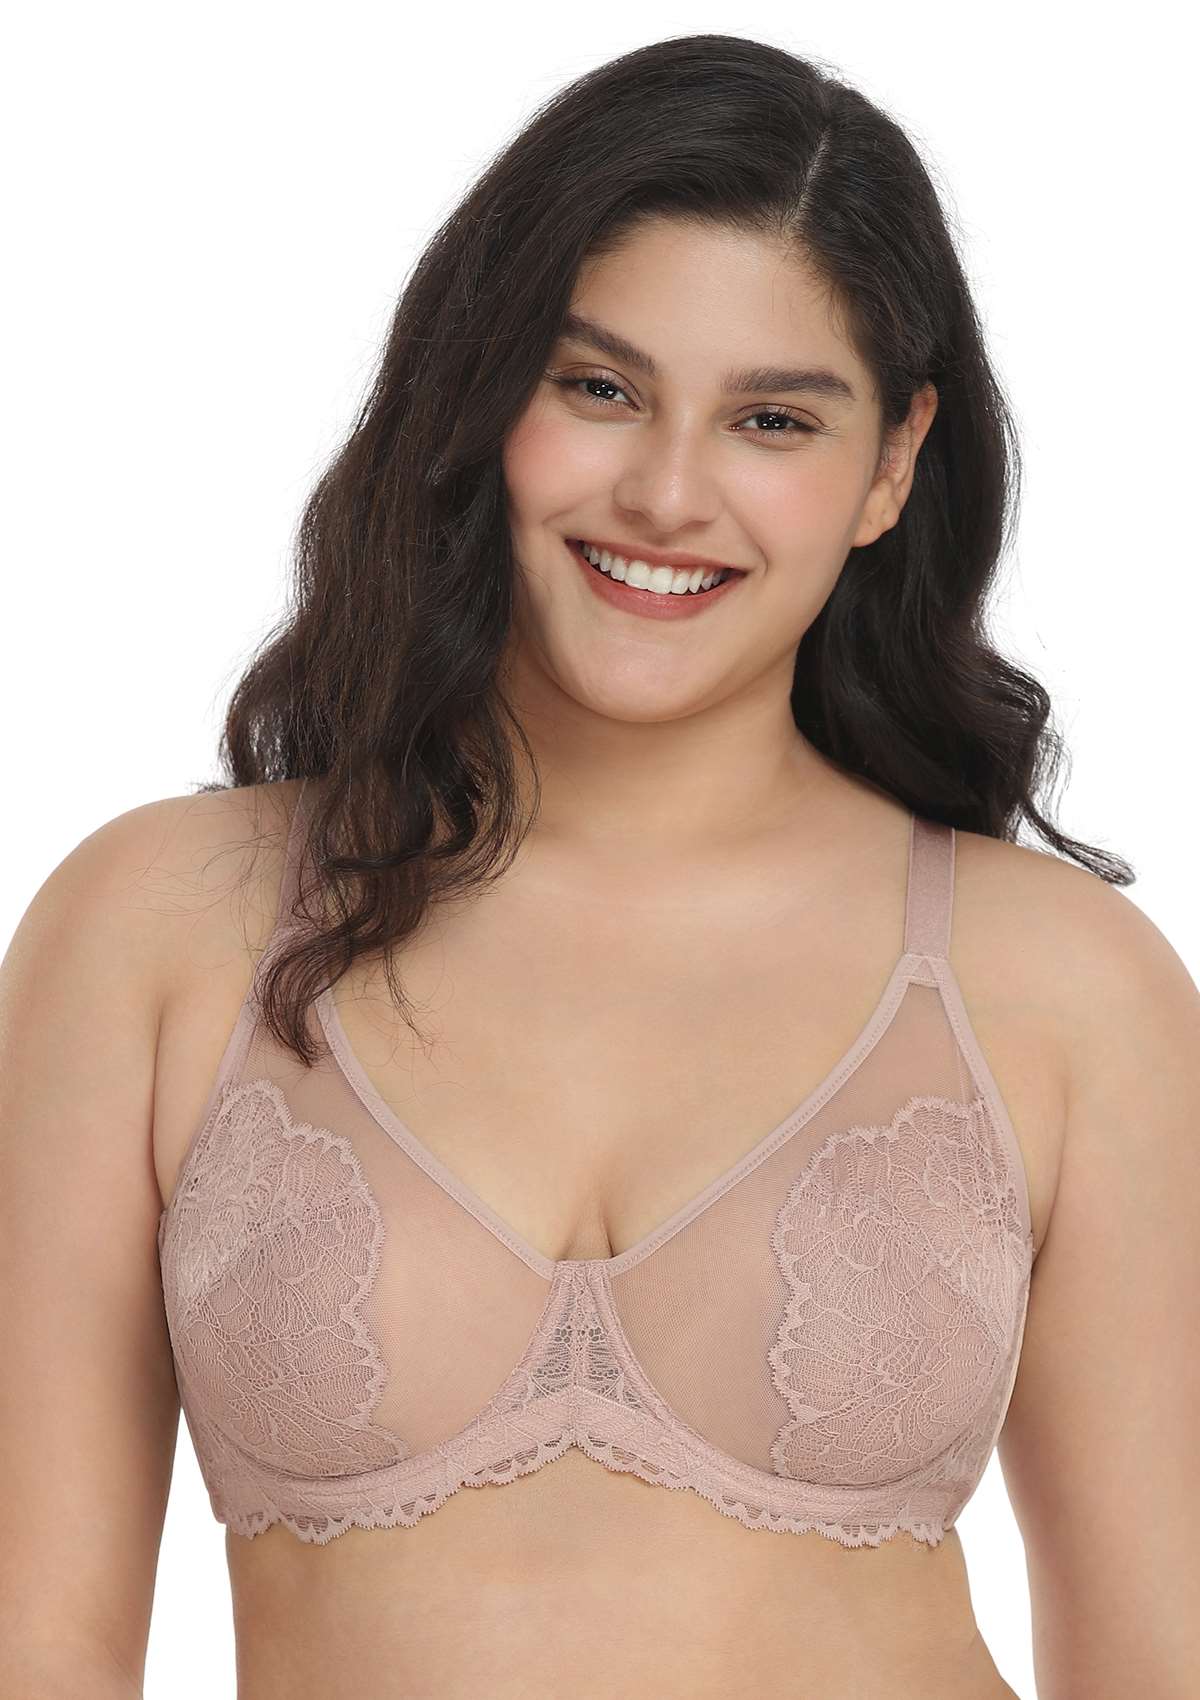 HSIA Blossom Lace Bra And Panties Set: Best Bra For Large Busts - Dark Pink / 38 / D